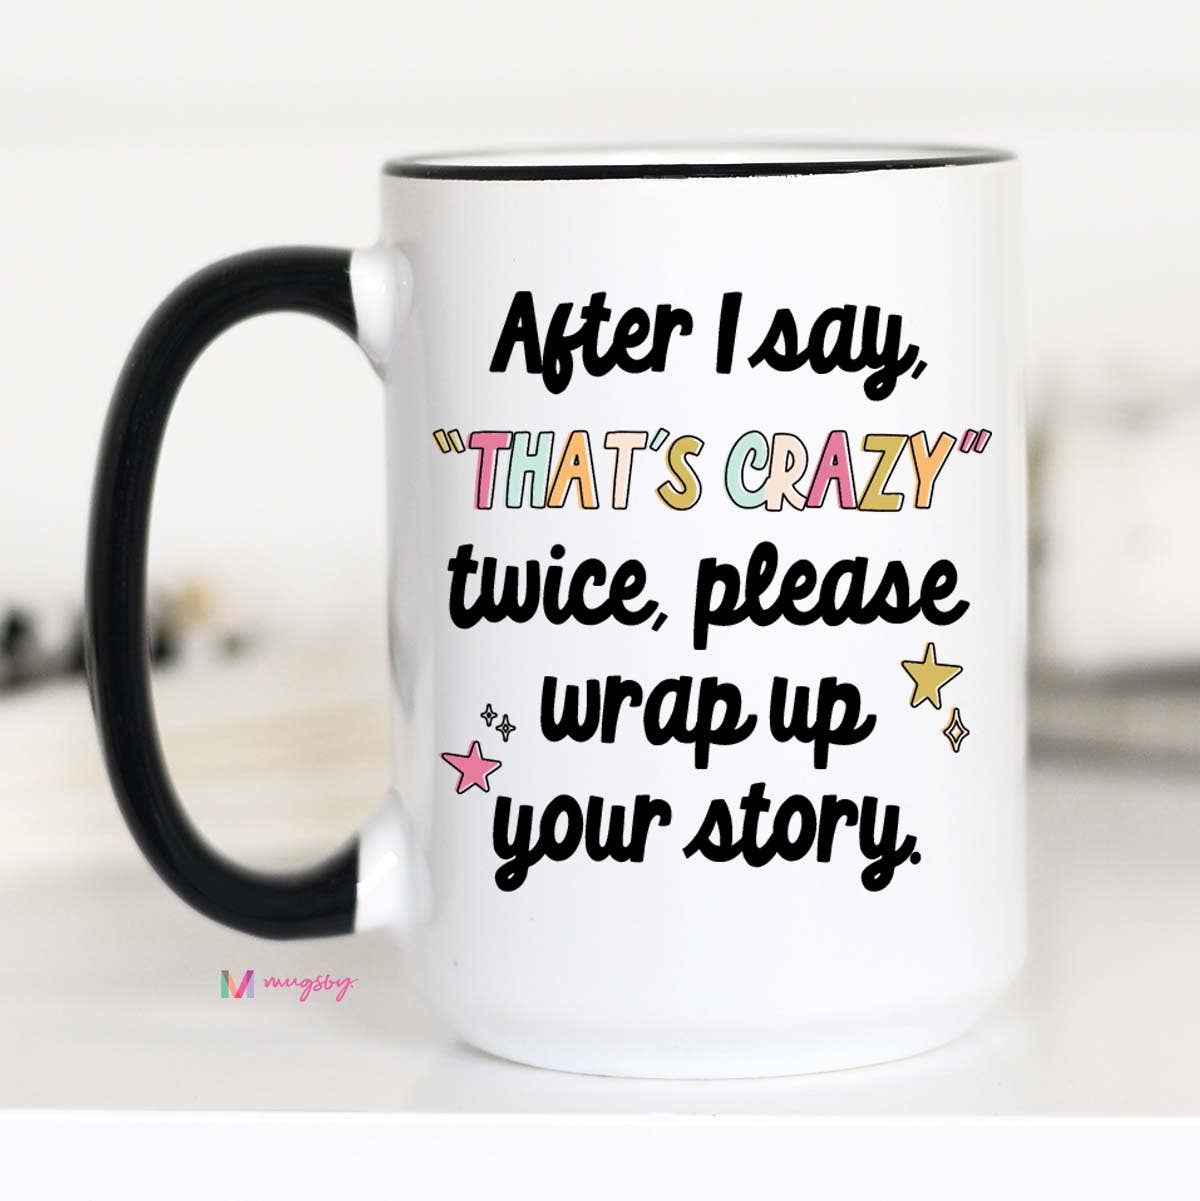 After I say that's crazy please wrap up Funny Coffee Mug